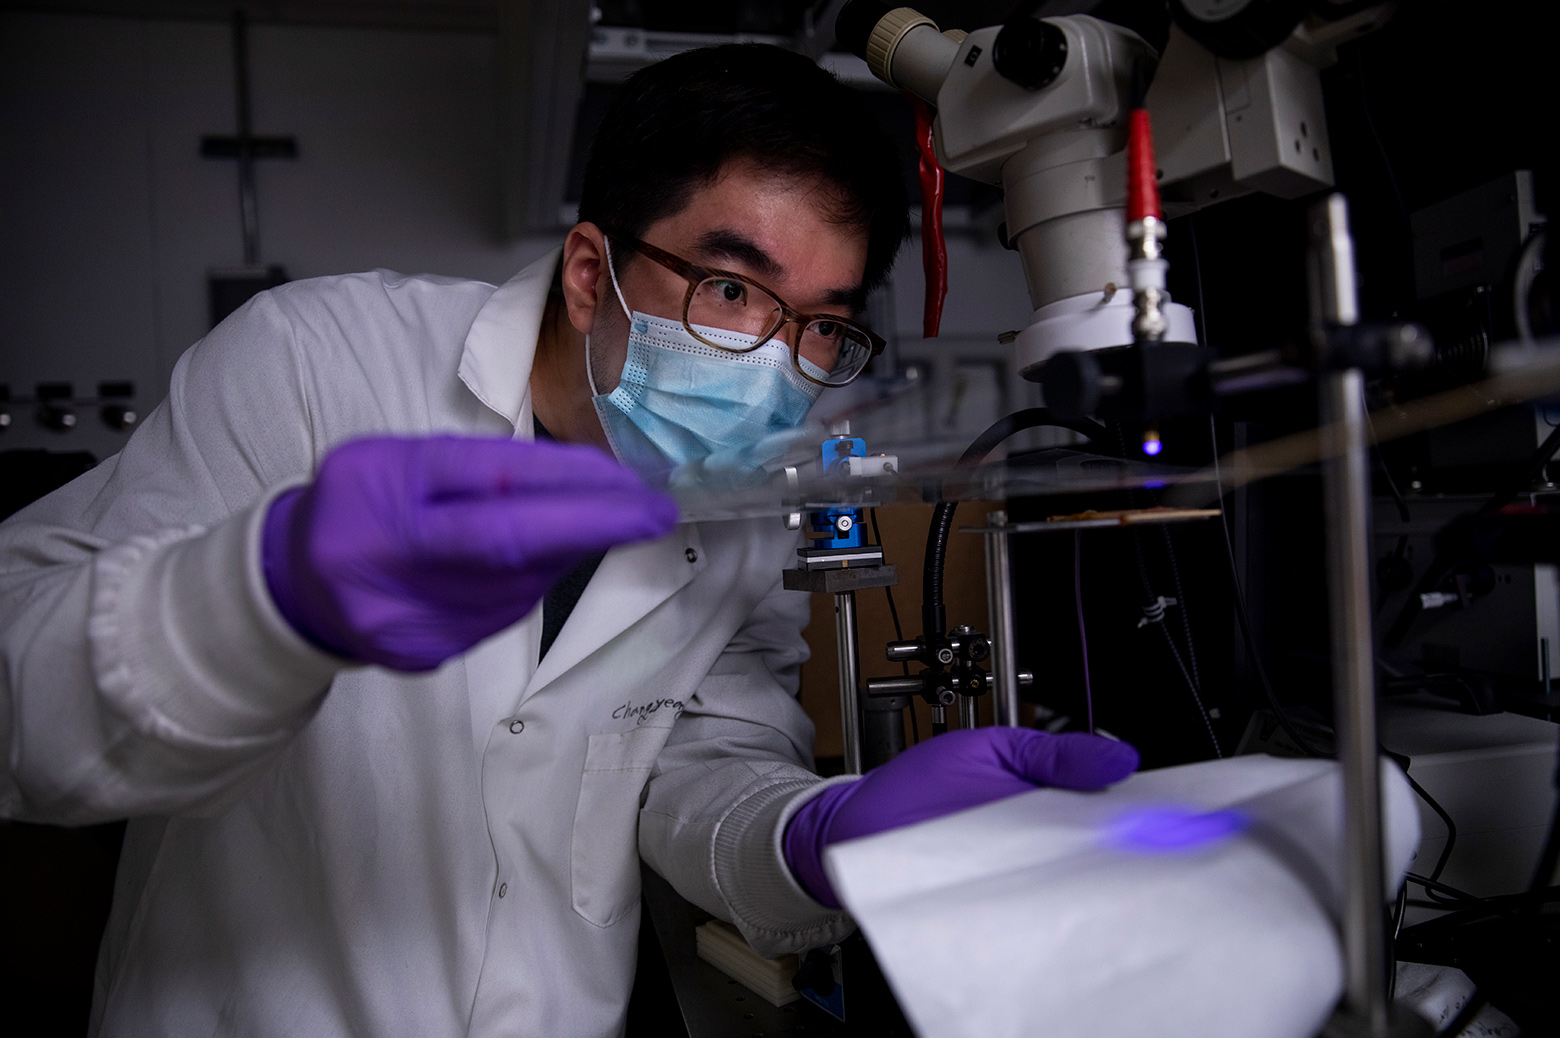 Changyeong Jeong, a graduate student in electrical engineering and computer science, measures how well light passes through a sheet of flexible transparent conductor. The material sandwiches a thin layer of silver between two “dielectric” materials, aluminum oxide and zinc oxide, producing a conductive anti-reflection coating on the sheet of plastic.